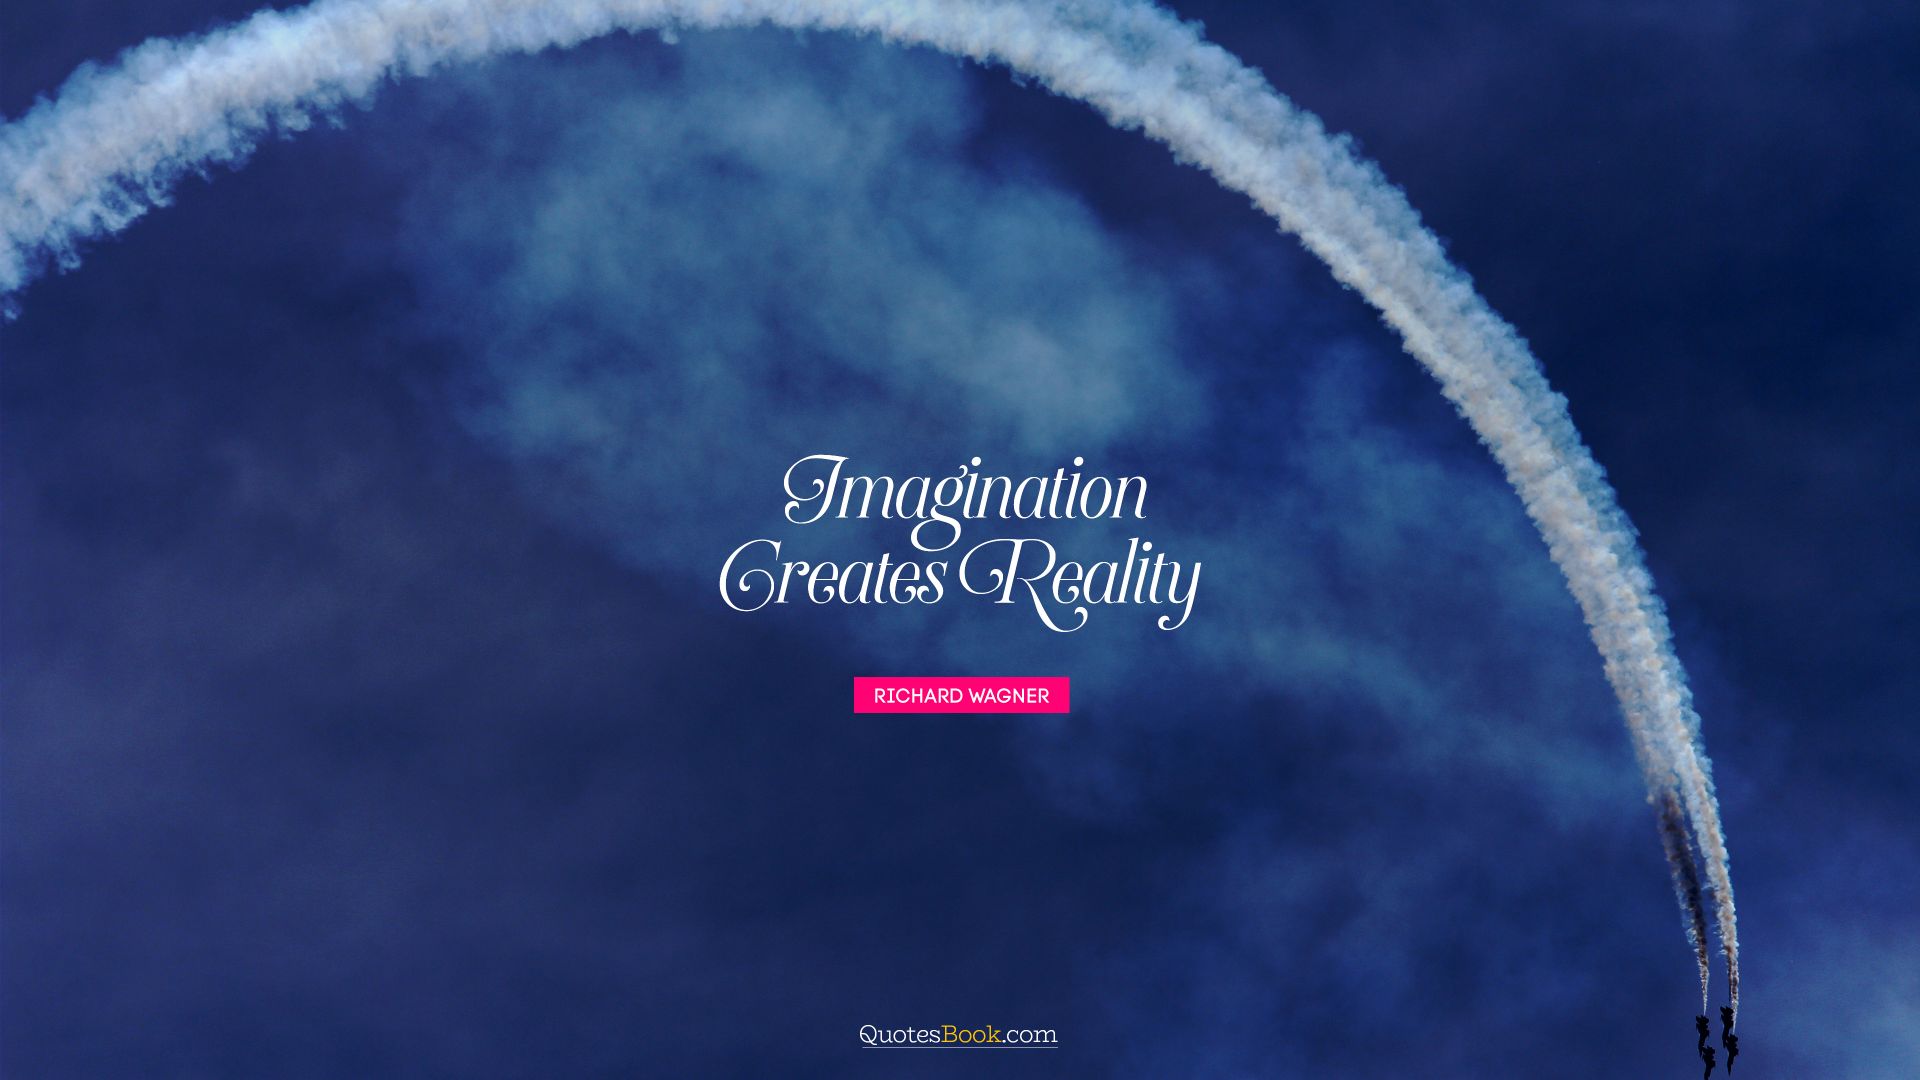 Imagination creates reality. - Quote by Richard Wagner